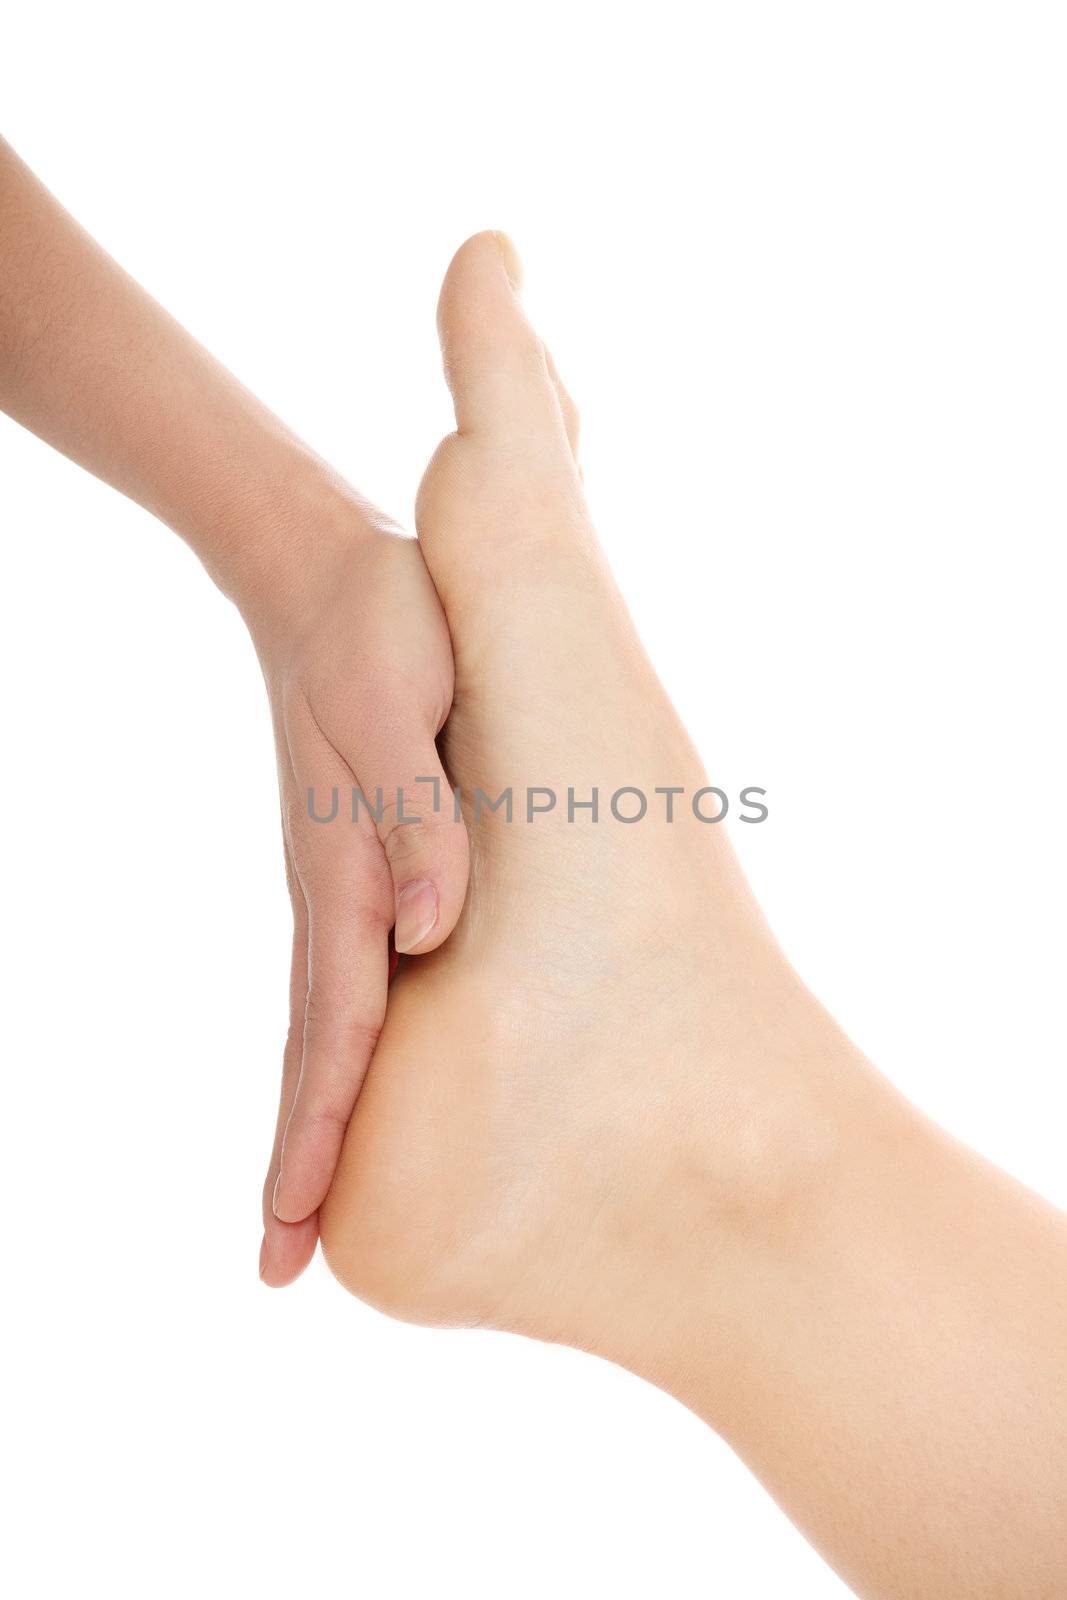 Woman hands giving a foot massage on white background